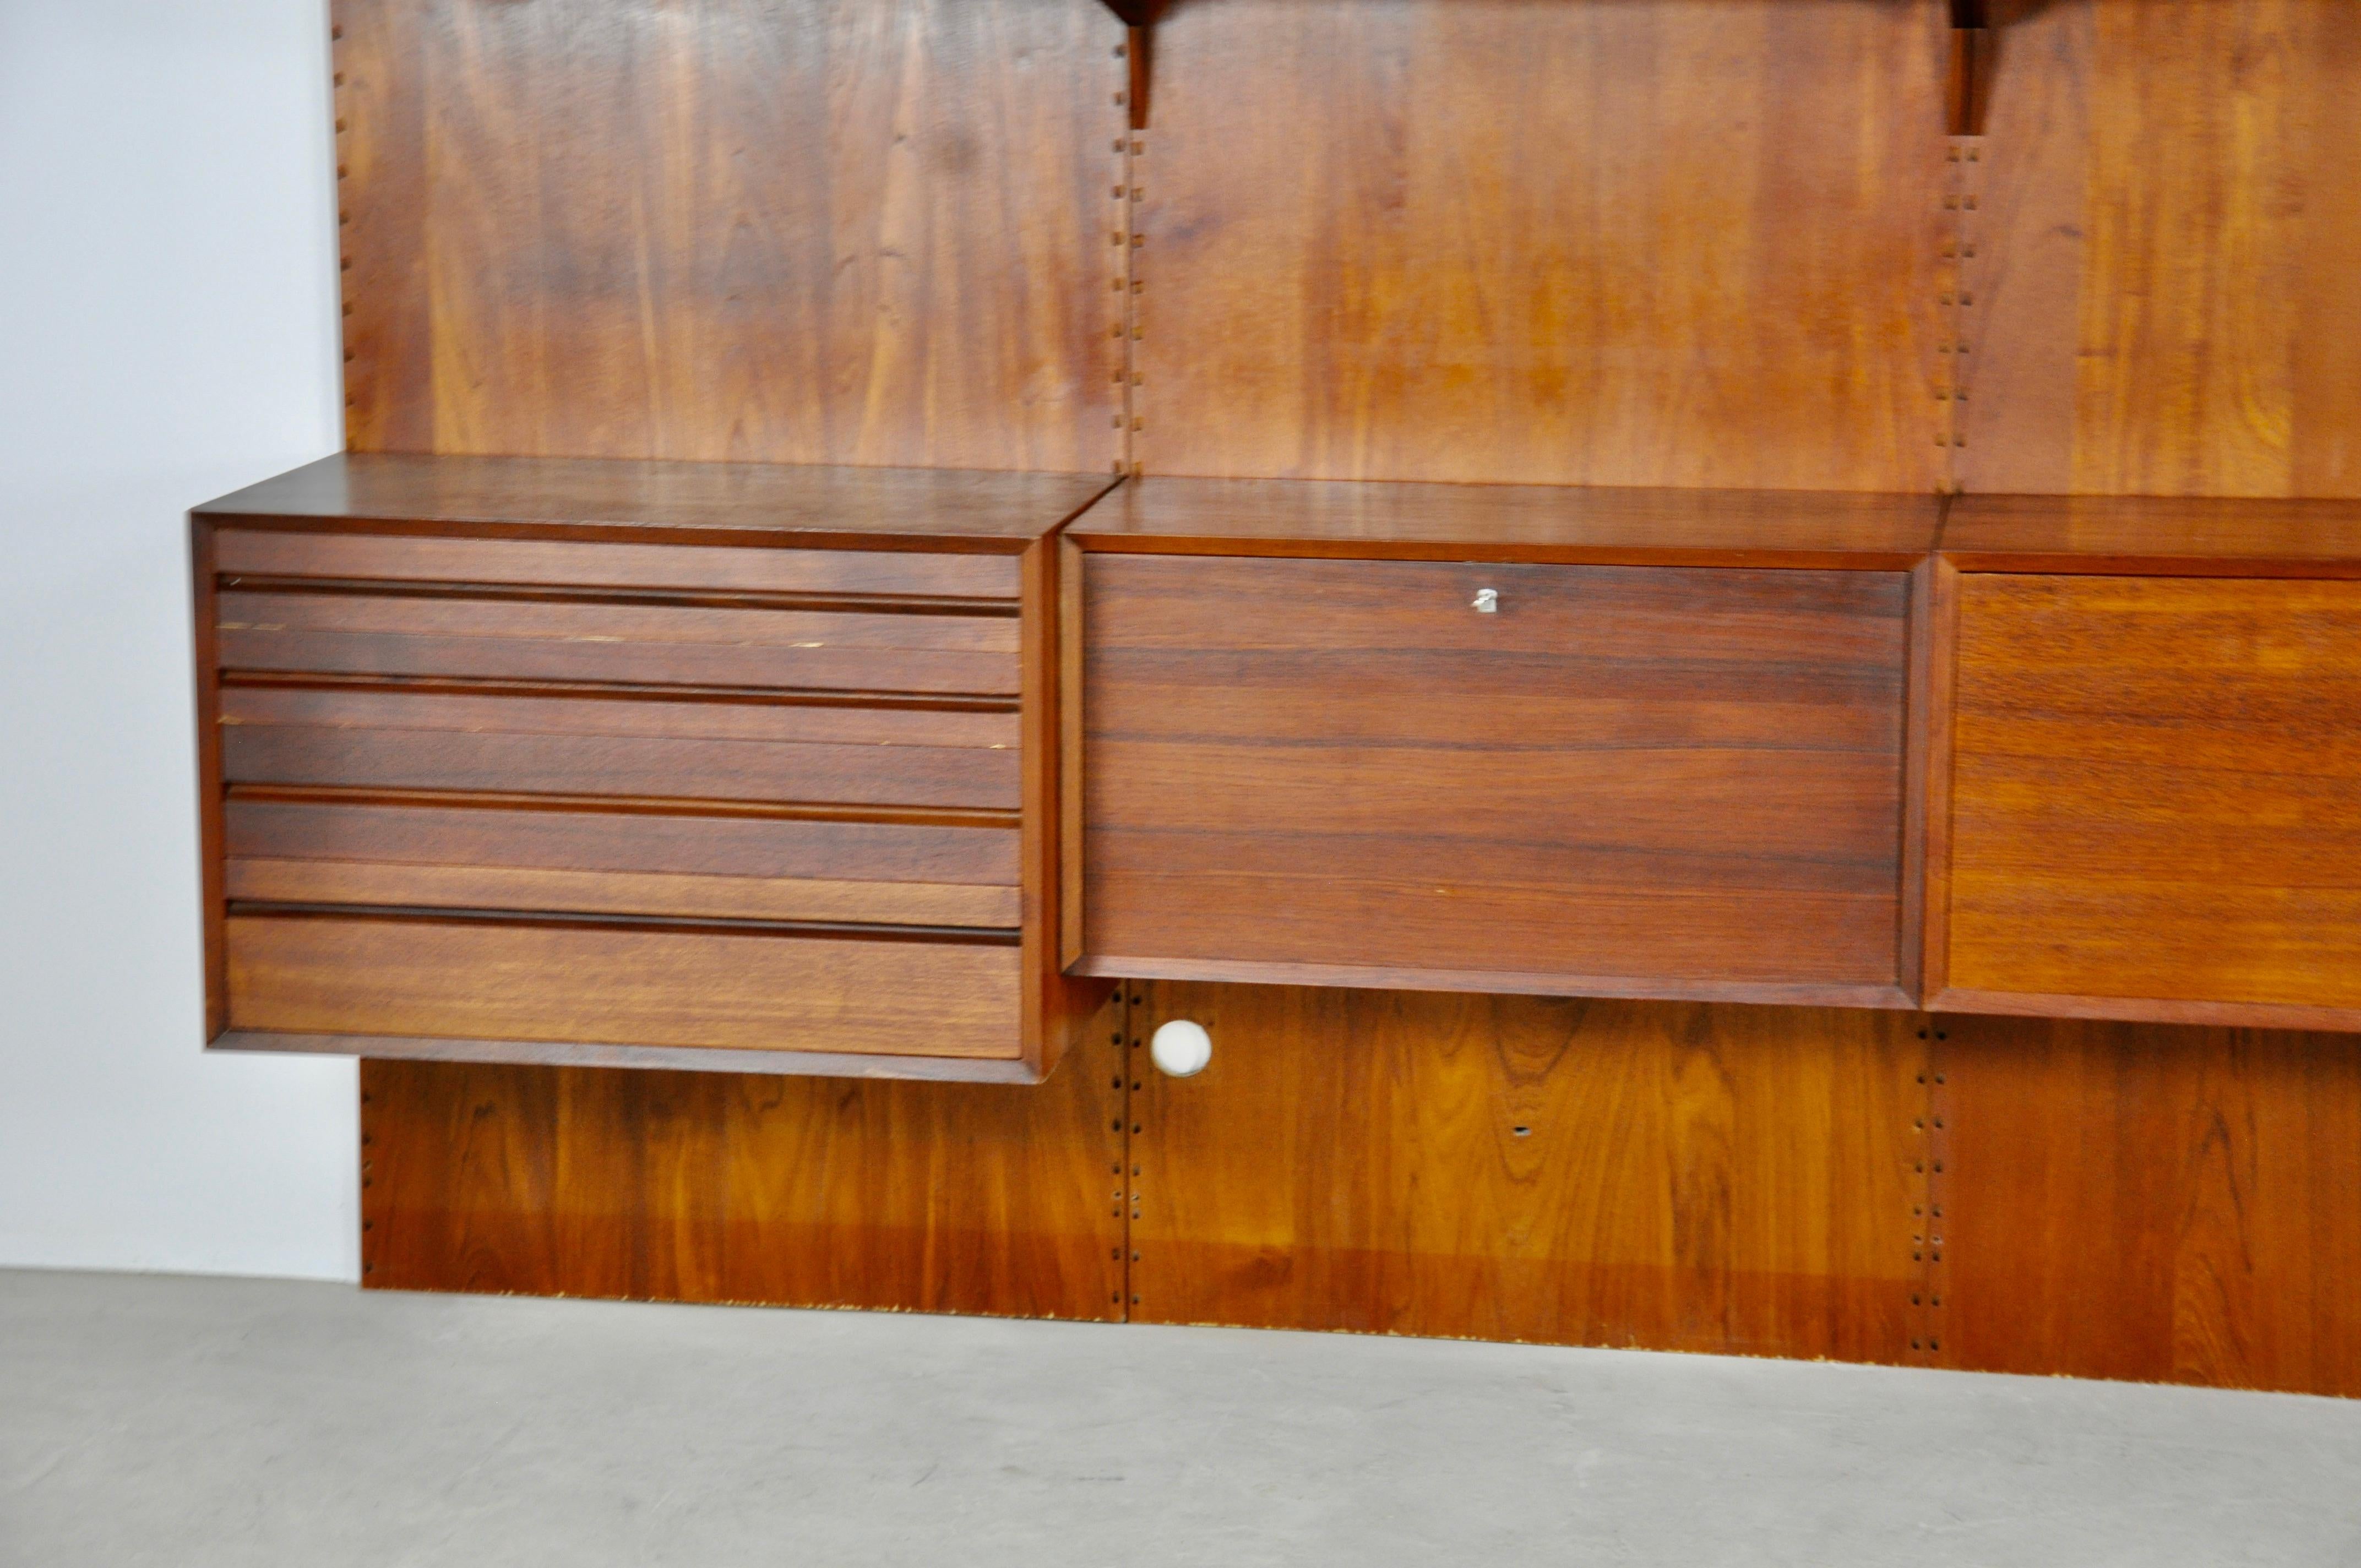 Wall unit composed of 10 boards, 4 back panels and 6 boxes. Wear due to time and age of the wall unit.